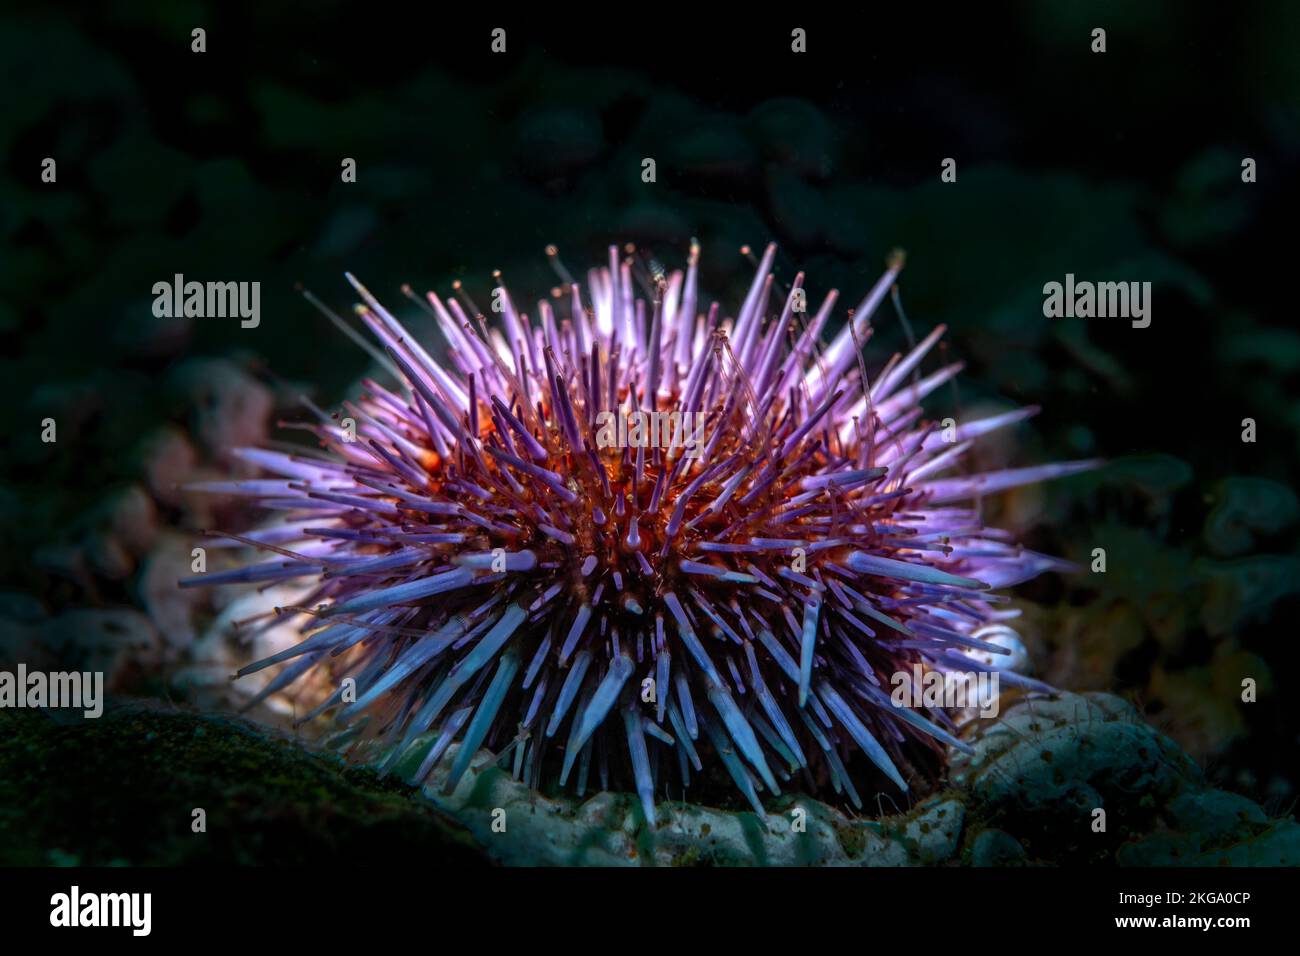 Backlighting of a common purple sea urchin on a reef at California's Channel Islands National Park brings out its true beauty. Stock Photo